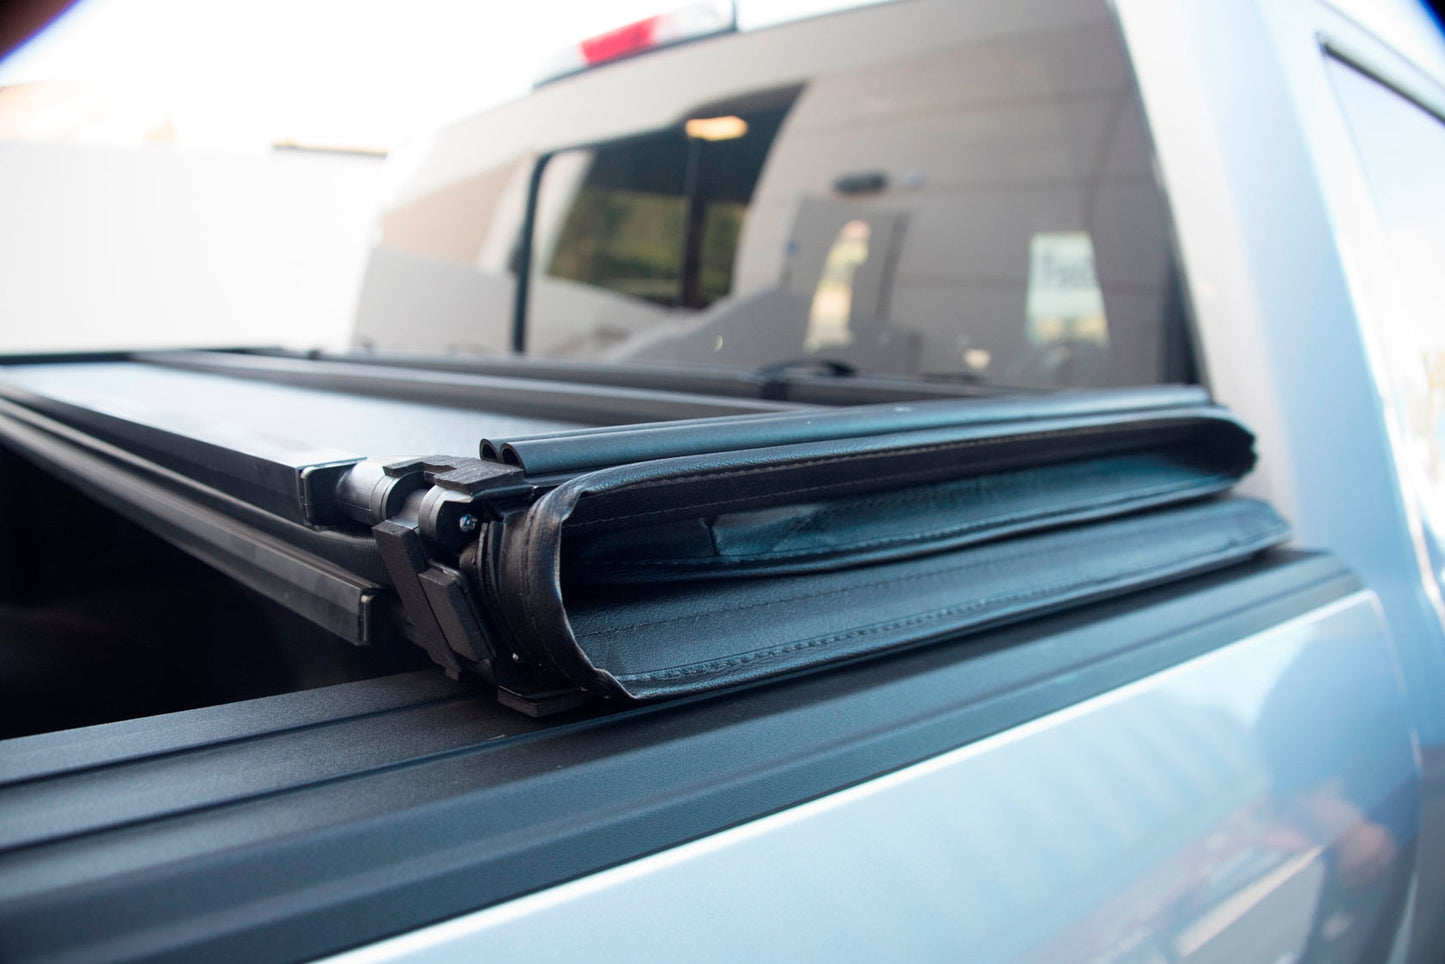 Armordillo 1997-2003 Ford F-150 Styleside CoveRex TF Series Folding Truck Bed Tonneau Cover (6.5 FT Bed) (Styleside Only) - Bayson R Motorsports